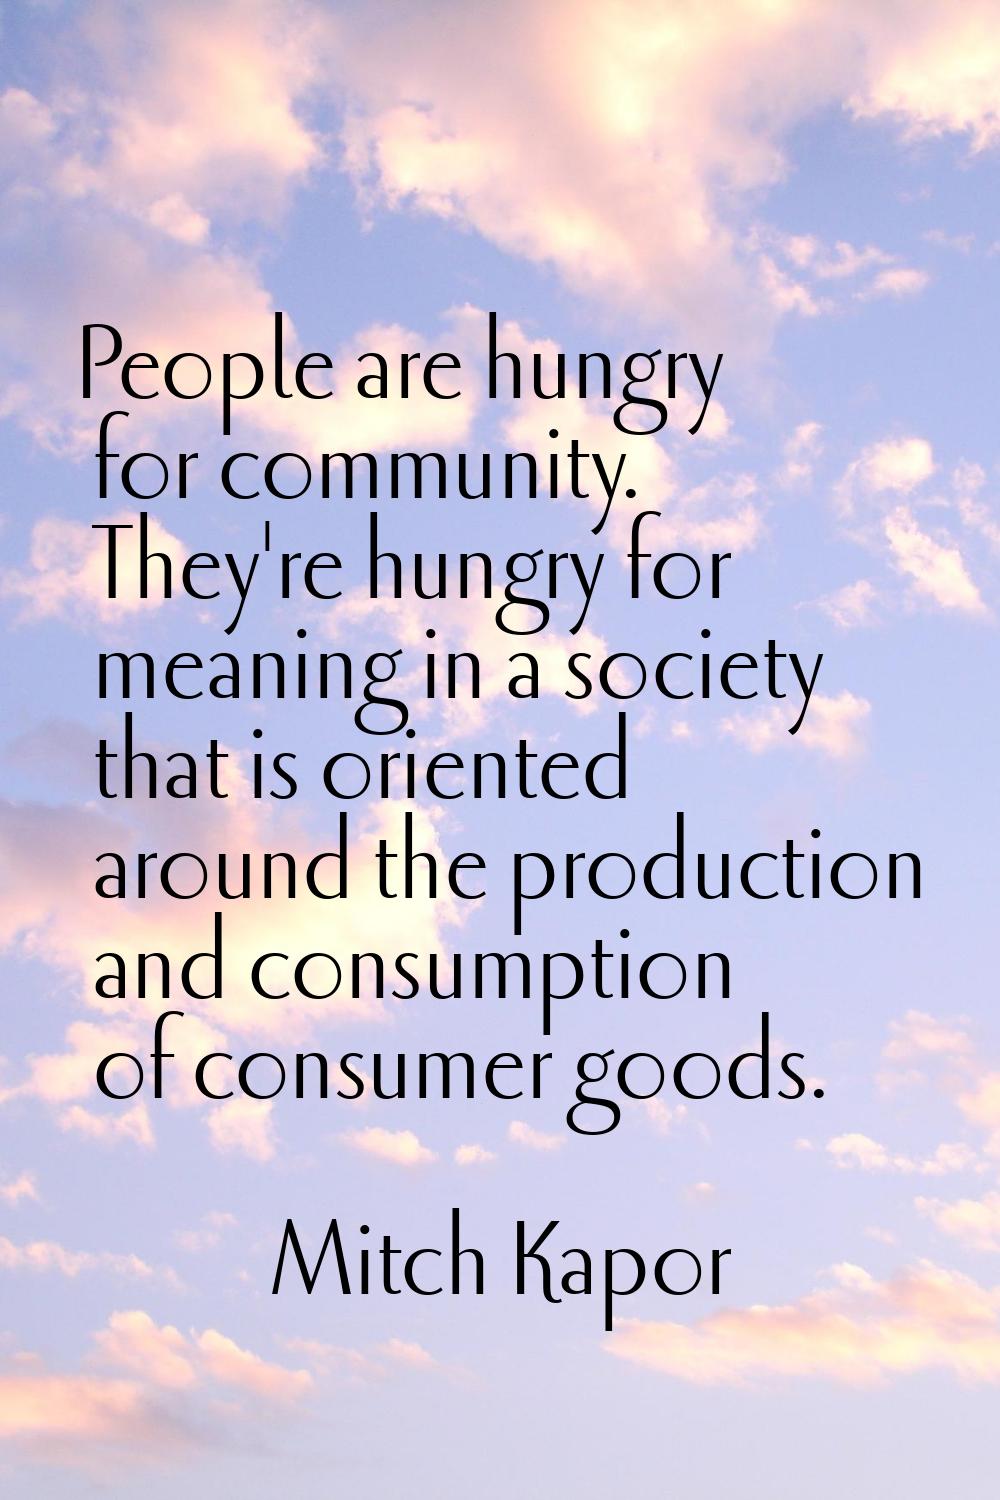 People are hungry for community. They're hungry for meaning in a society that is oriented around th